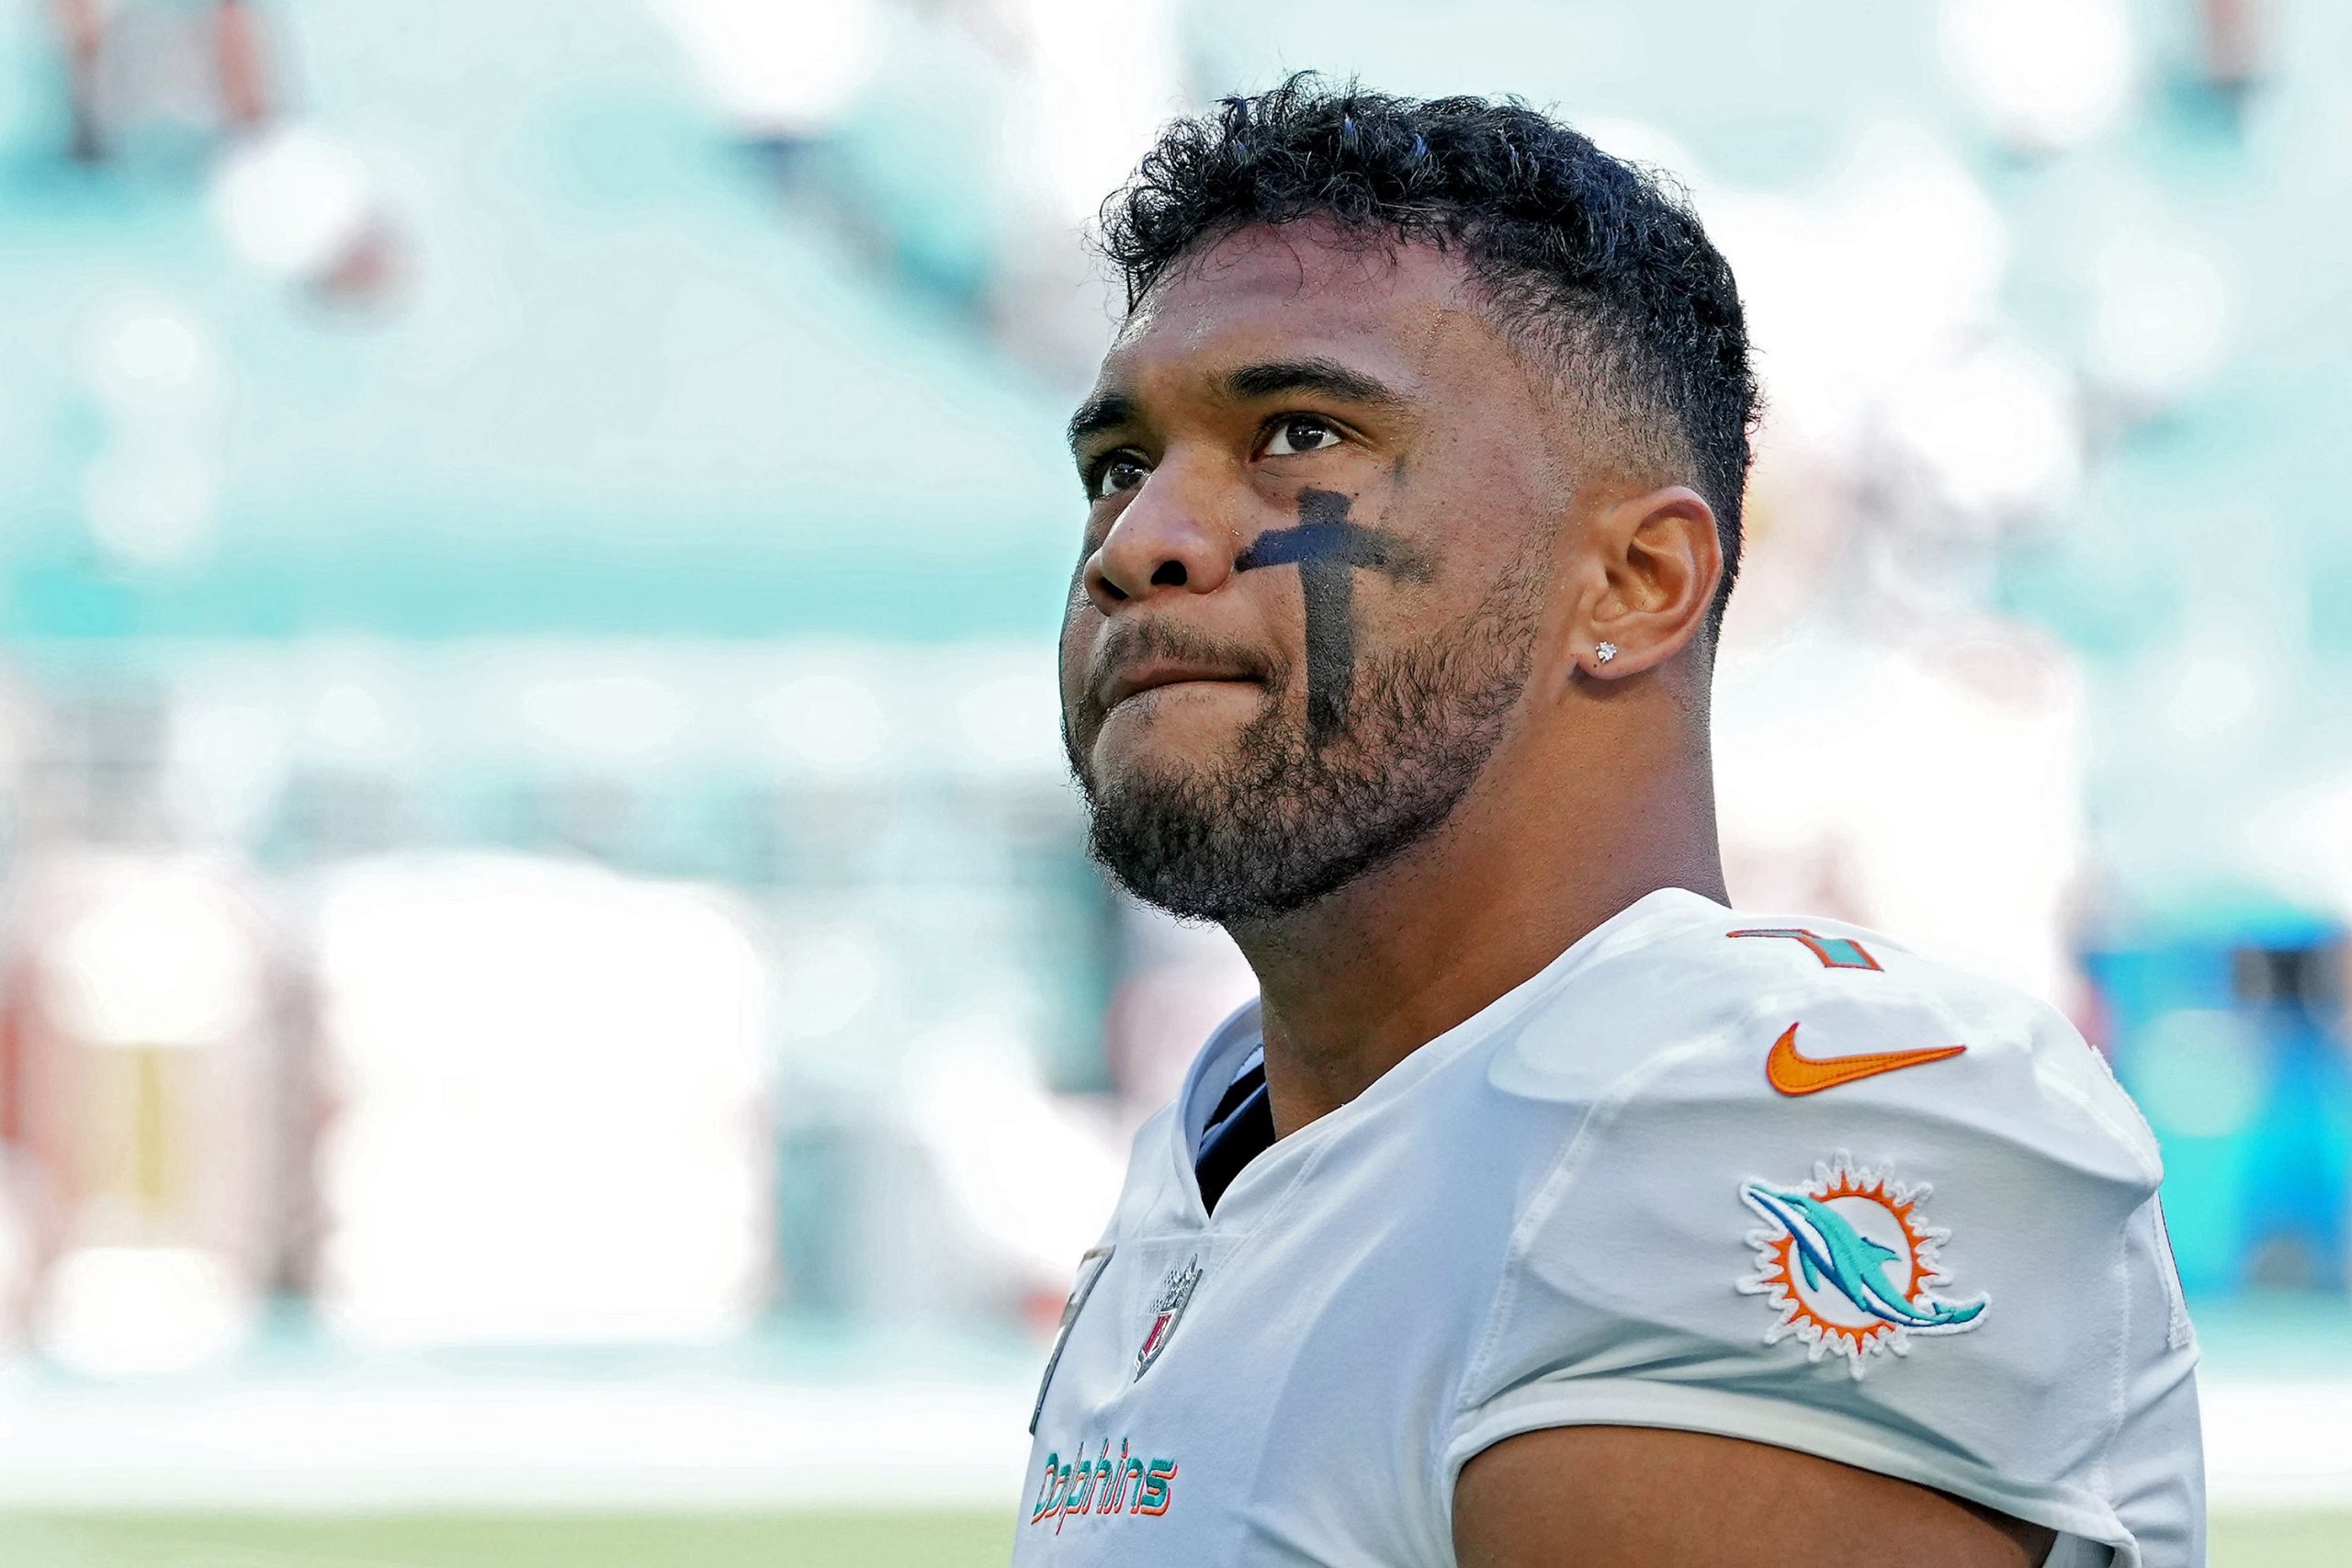  Will Tua Tagovailoa Stay With the Dolphins? Inside the Buzz on Miami’s Star QB’s Future